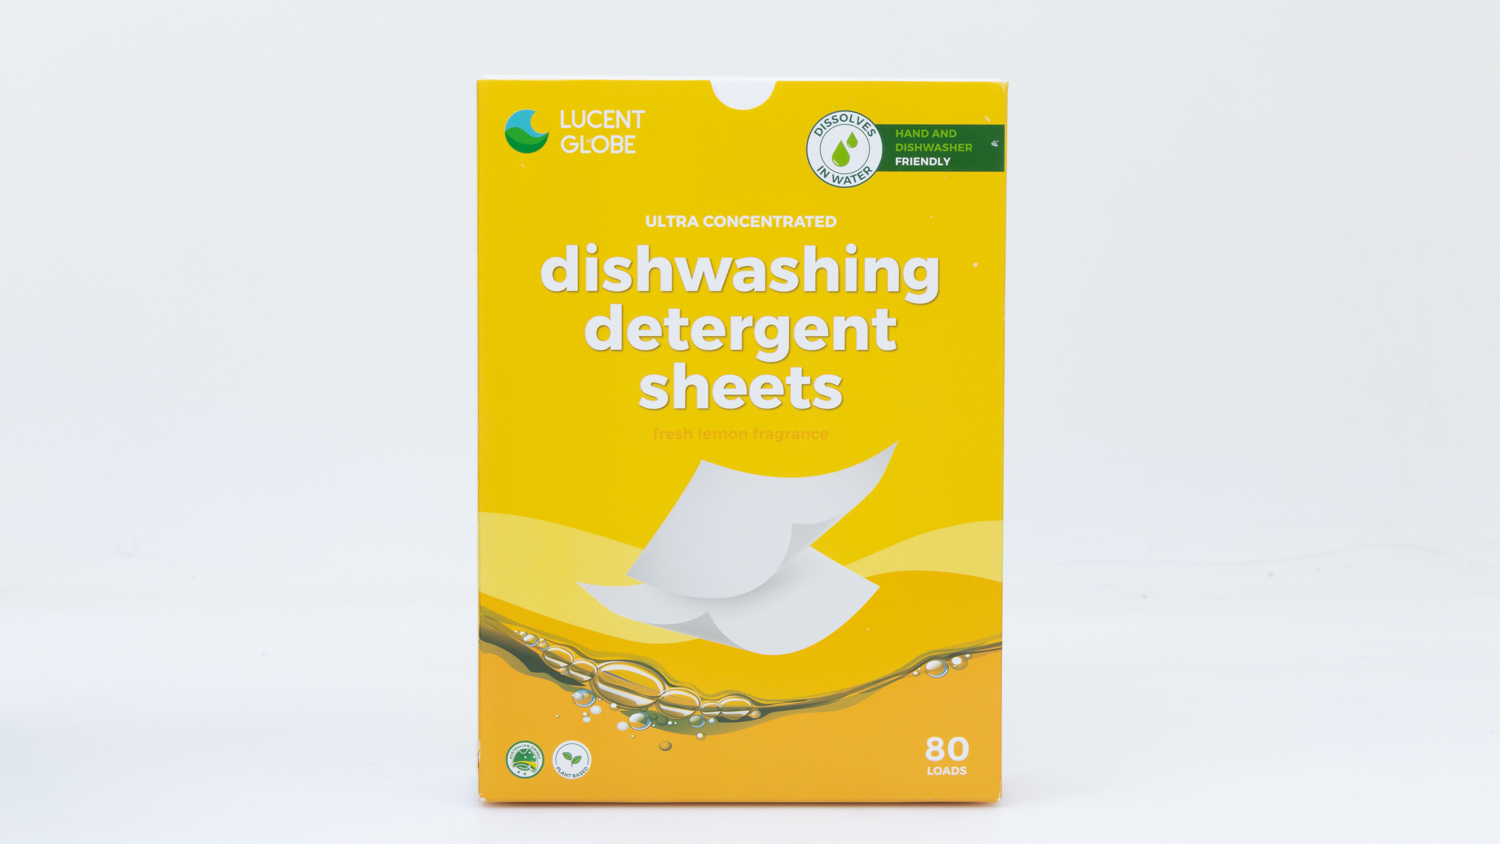 Lucent Globe Ultra Concentrated Dishwashing Detergents Sheets carousel image